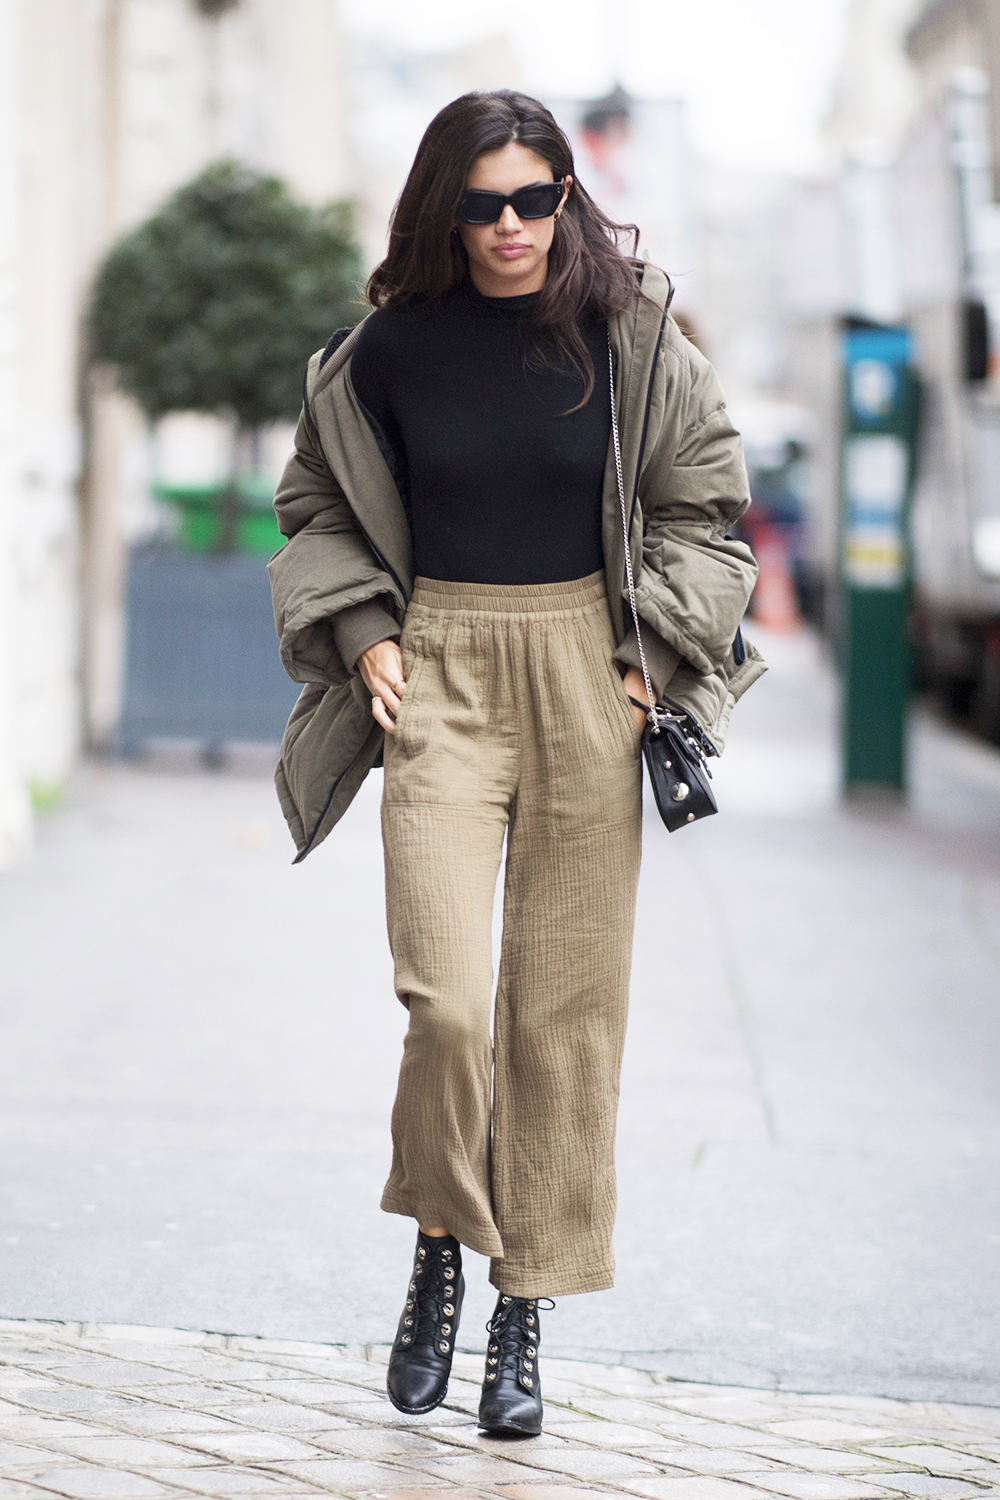 The Best Model Off Duty Outfits Who What Wear